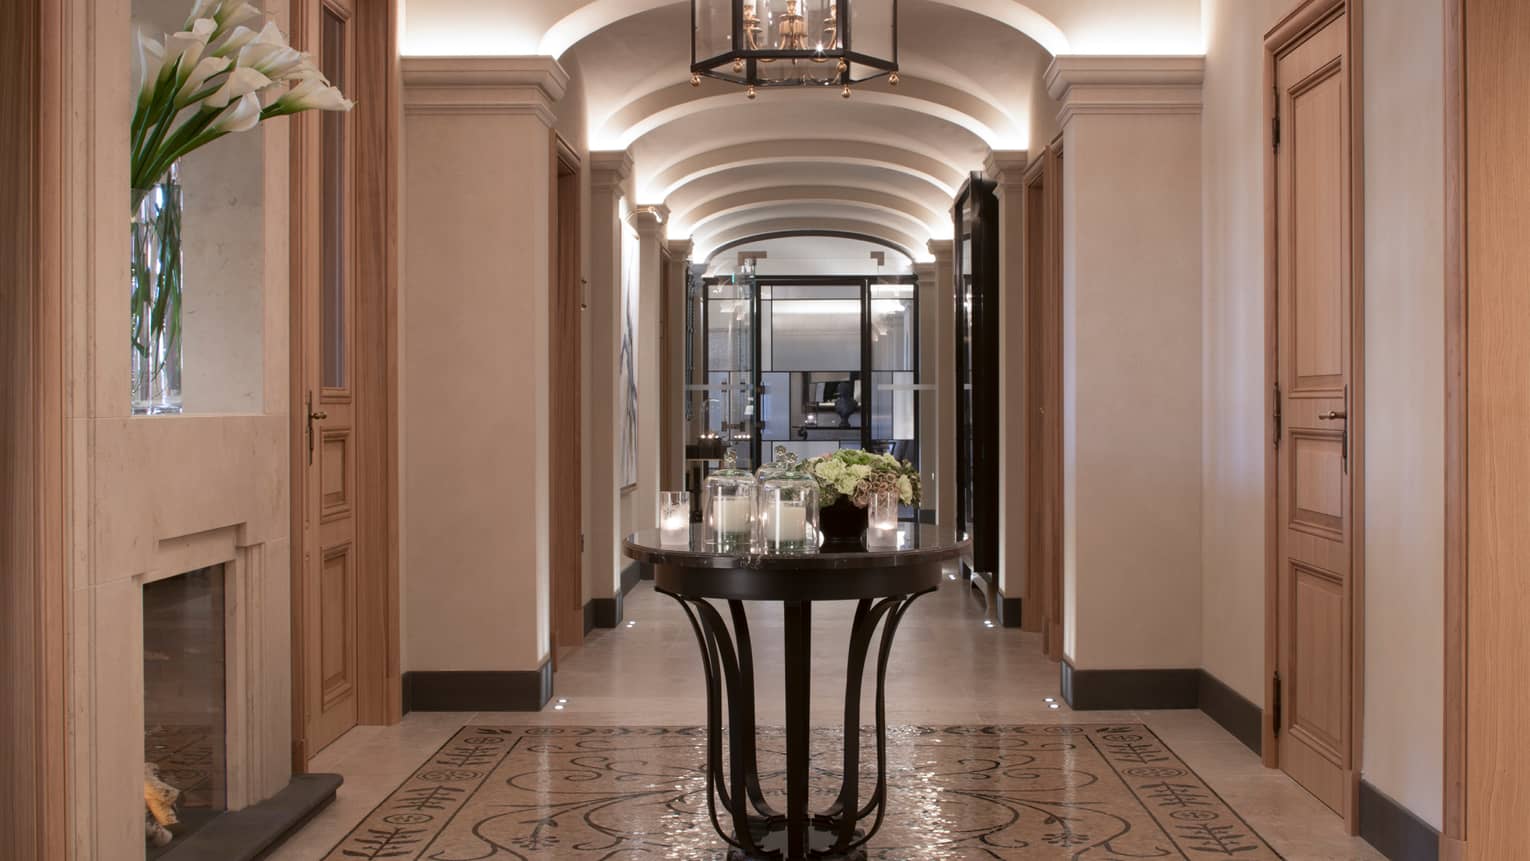 Hotel hallway with marble floors, round table with multiple white candles in glass votives, fresh flowers